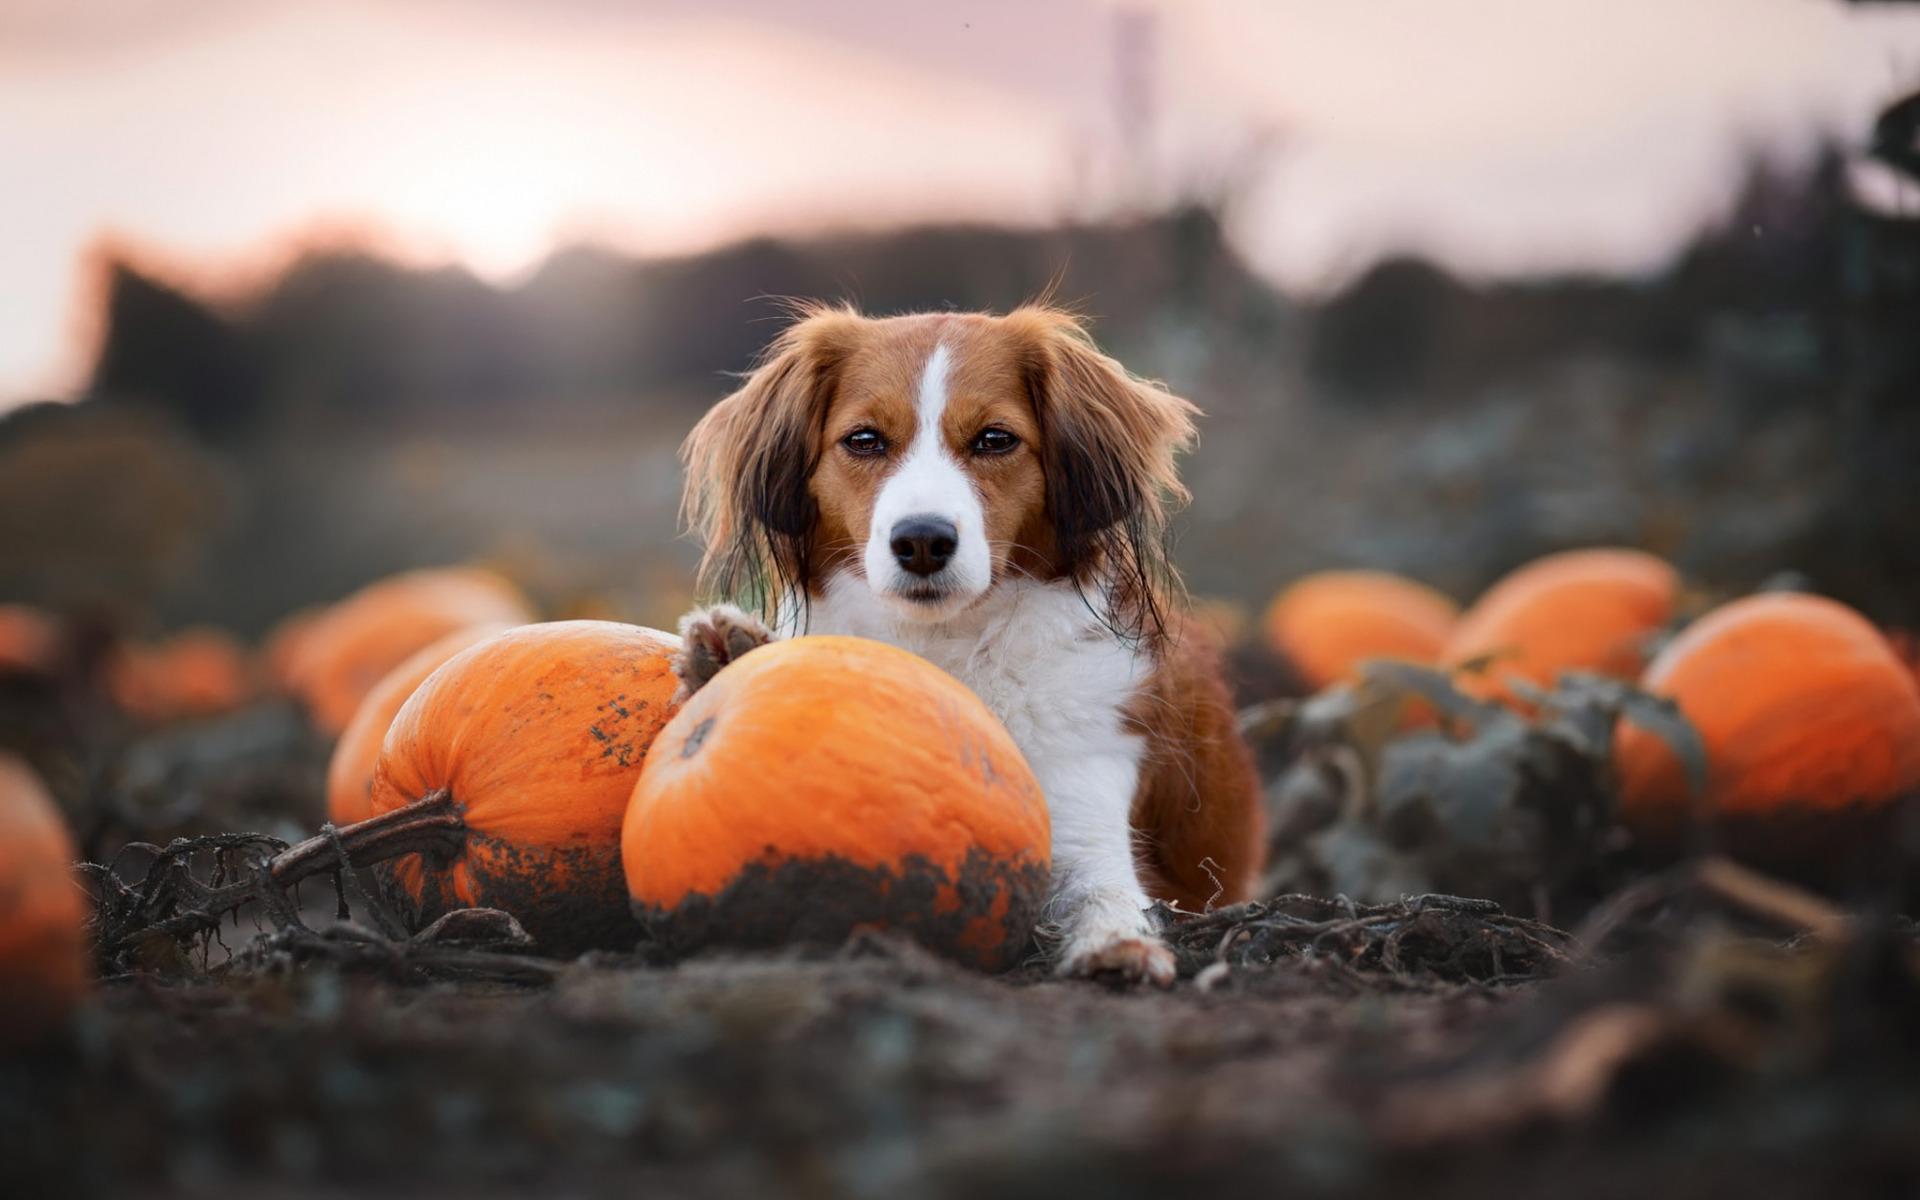 Download wallpaper Cavalier King Charles Spaniel, pumpkins, halloween, autumn, pets, brown curly dog for desktop with resolution 1920x1200. High Quality HD picture wallpaper